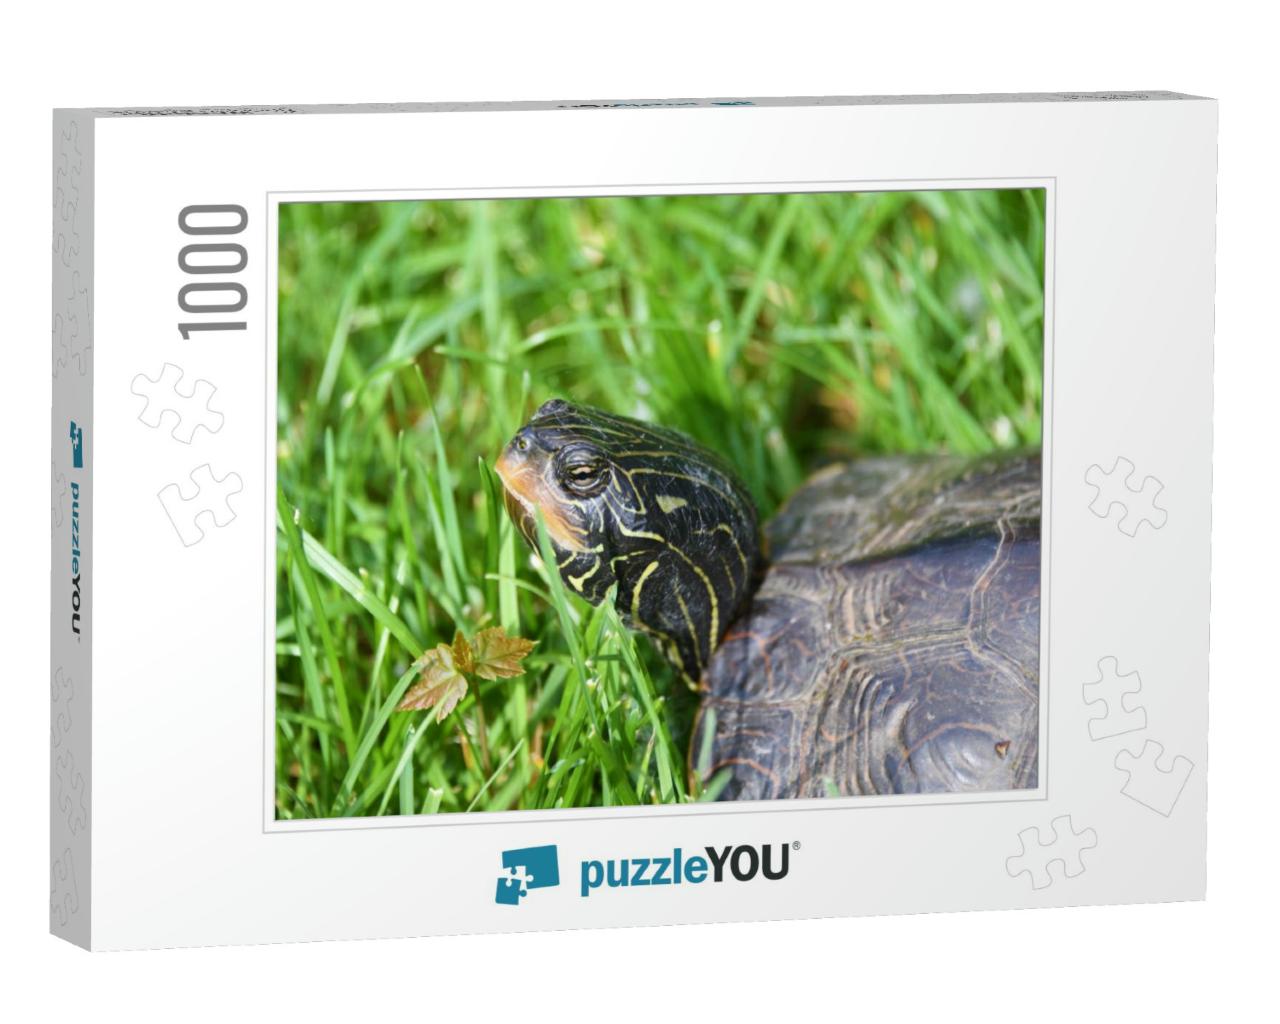 Close Up Turtle Portrait, Cute Turtle... Jigsaw Puzzle with 1000 pieces